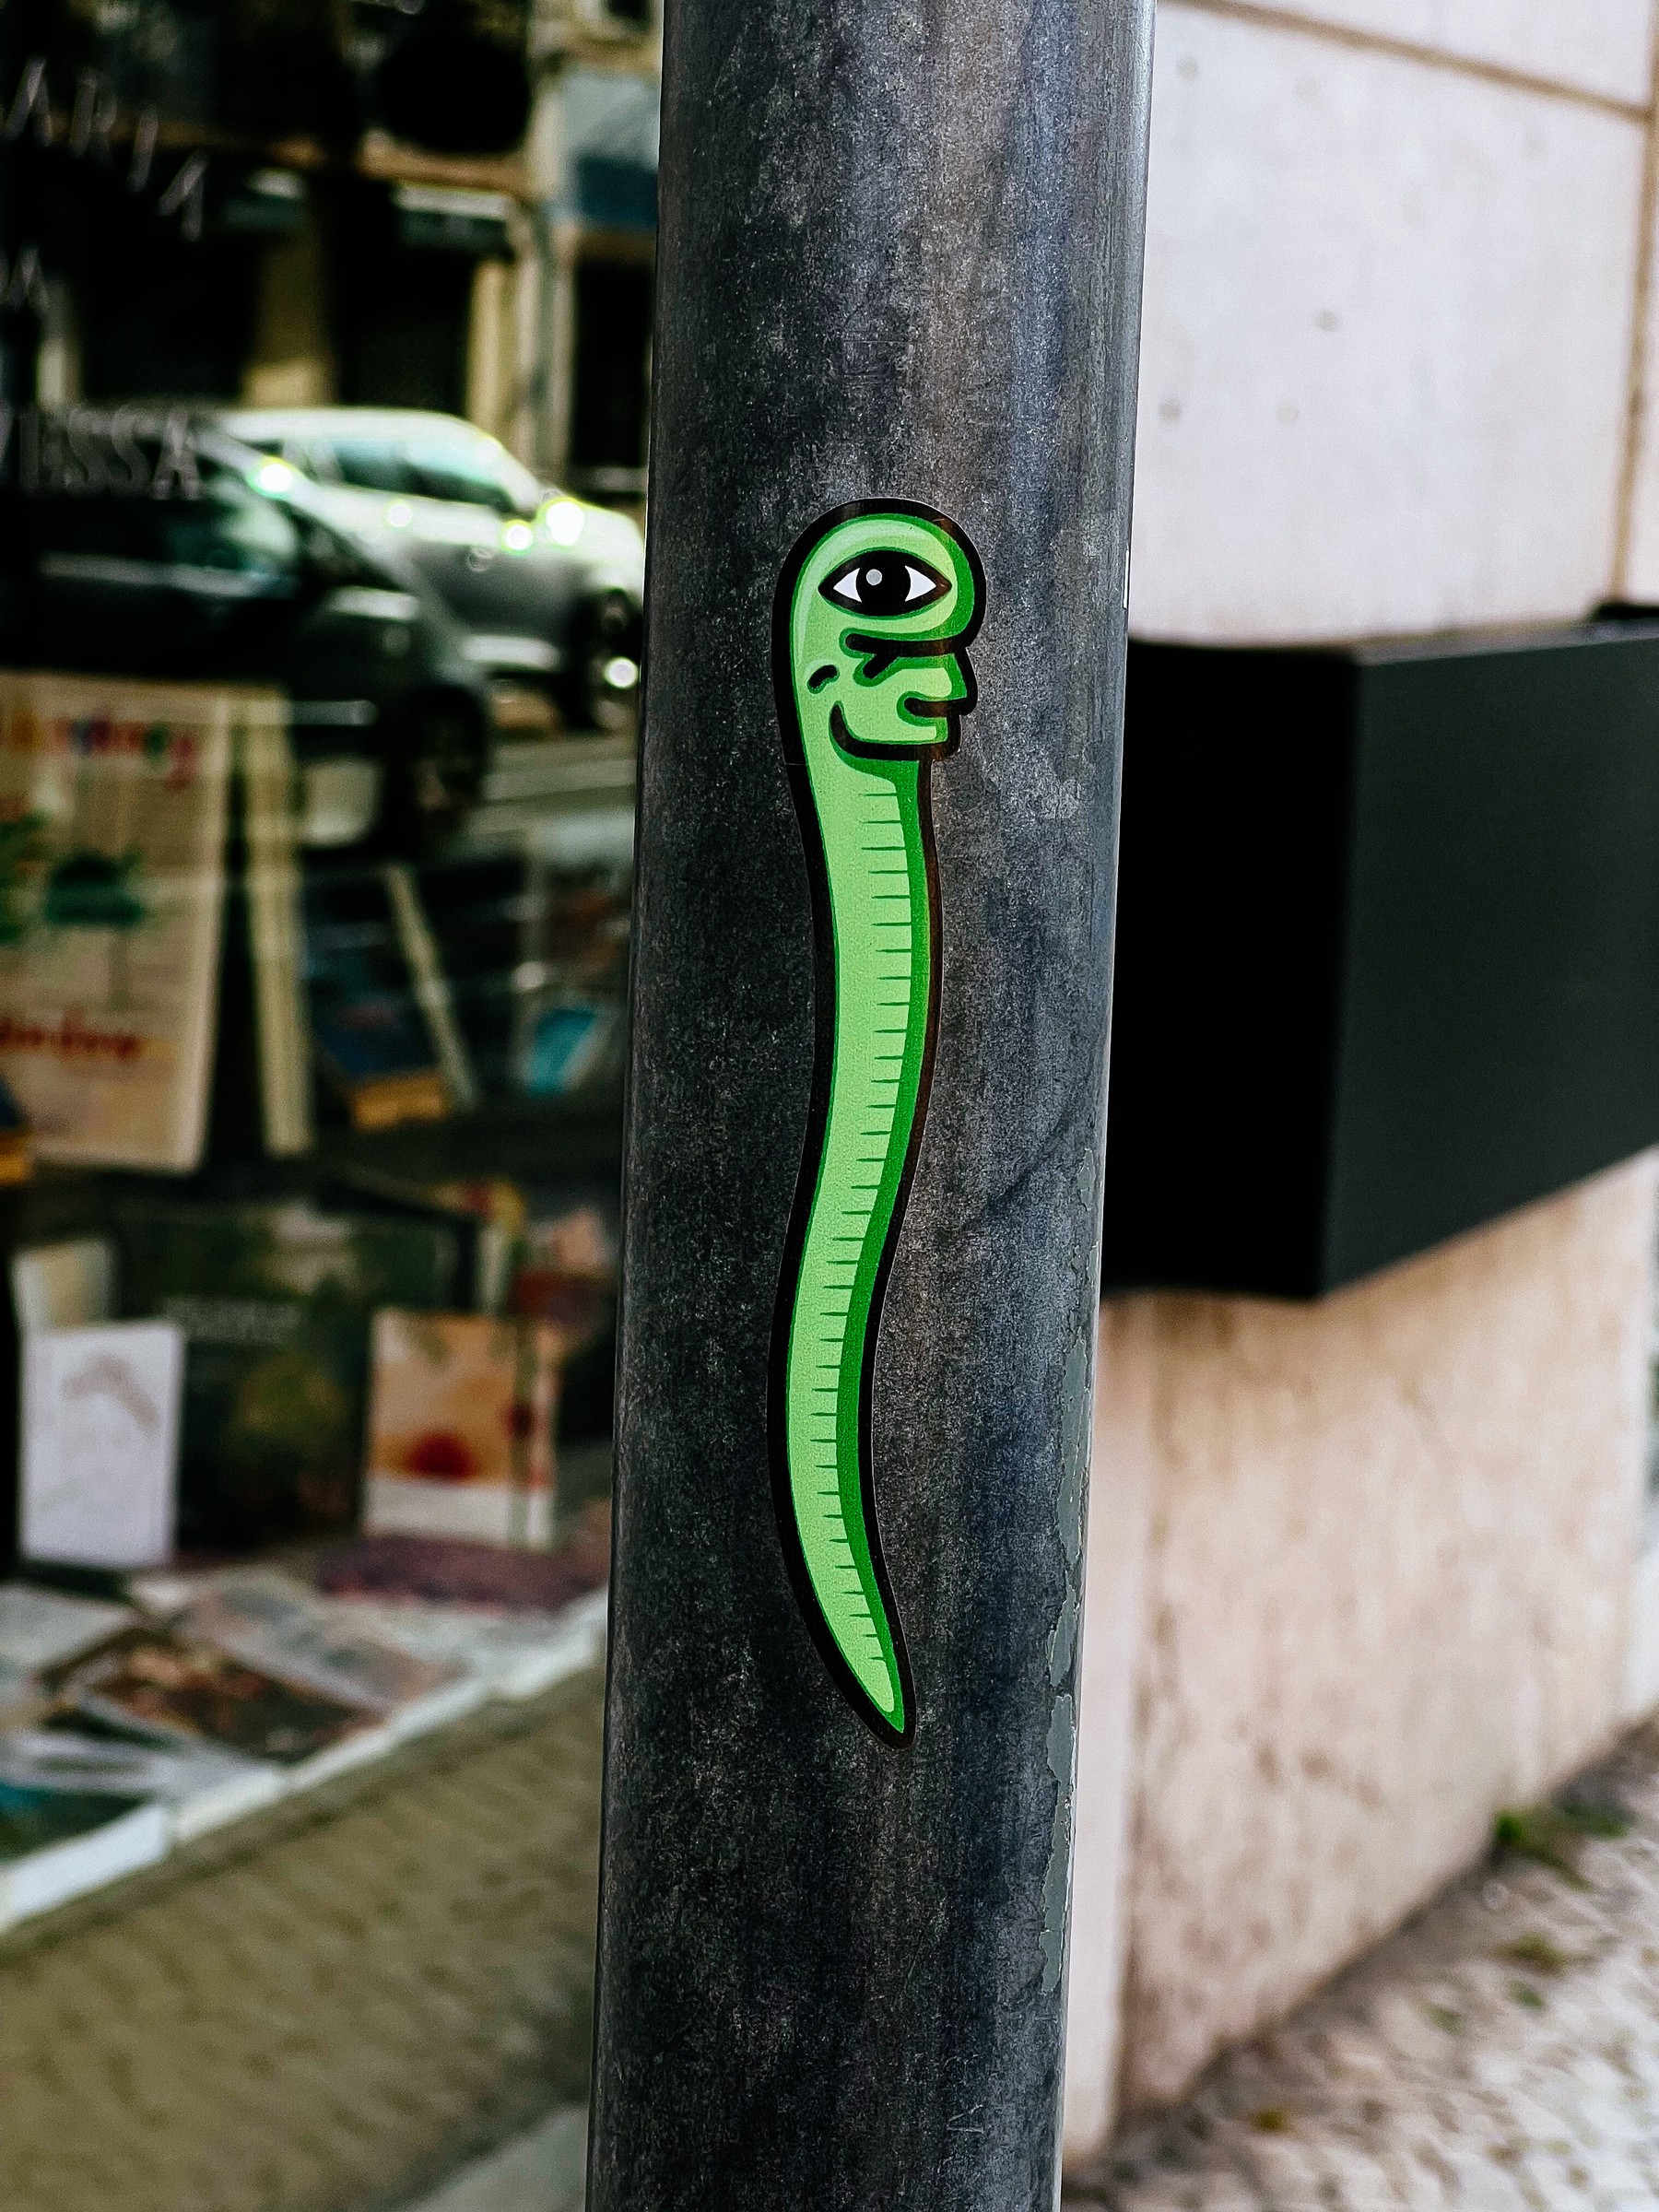 Sticker with a strange looking cartoony snake. Green, with a human like mouth, and one eye. 